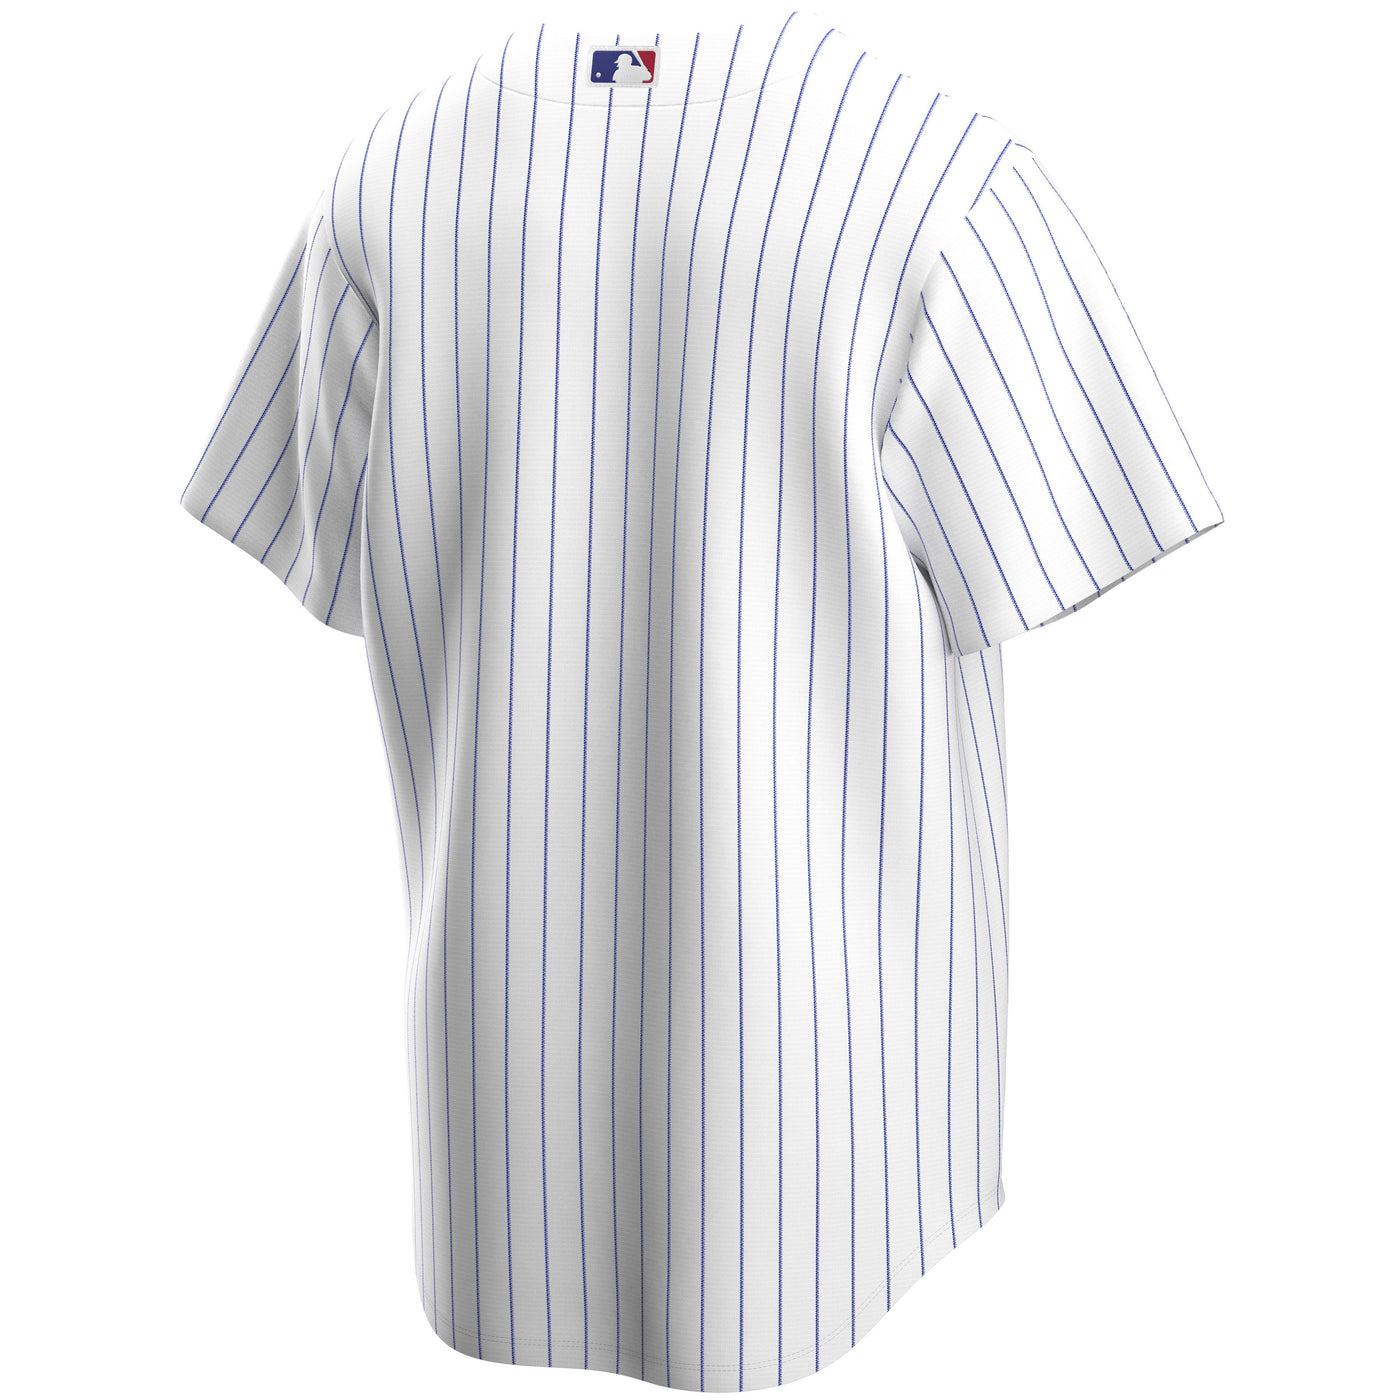 Chicago Cubs Personalized Baseball Jersey Shirt 115